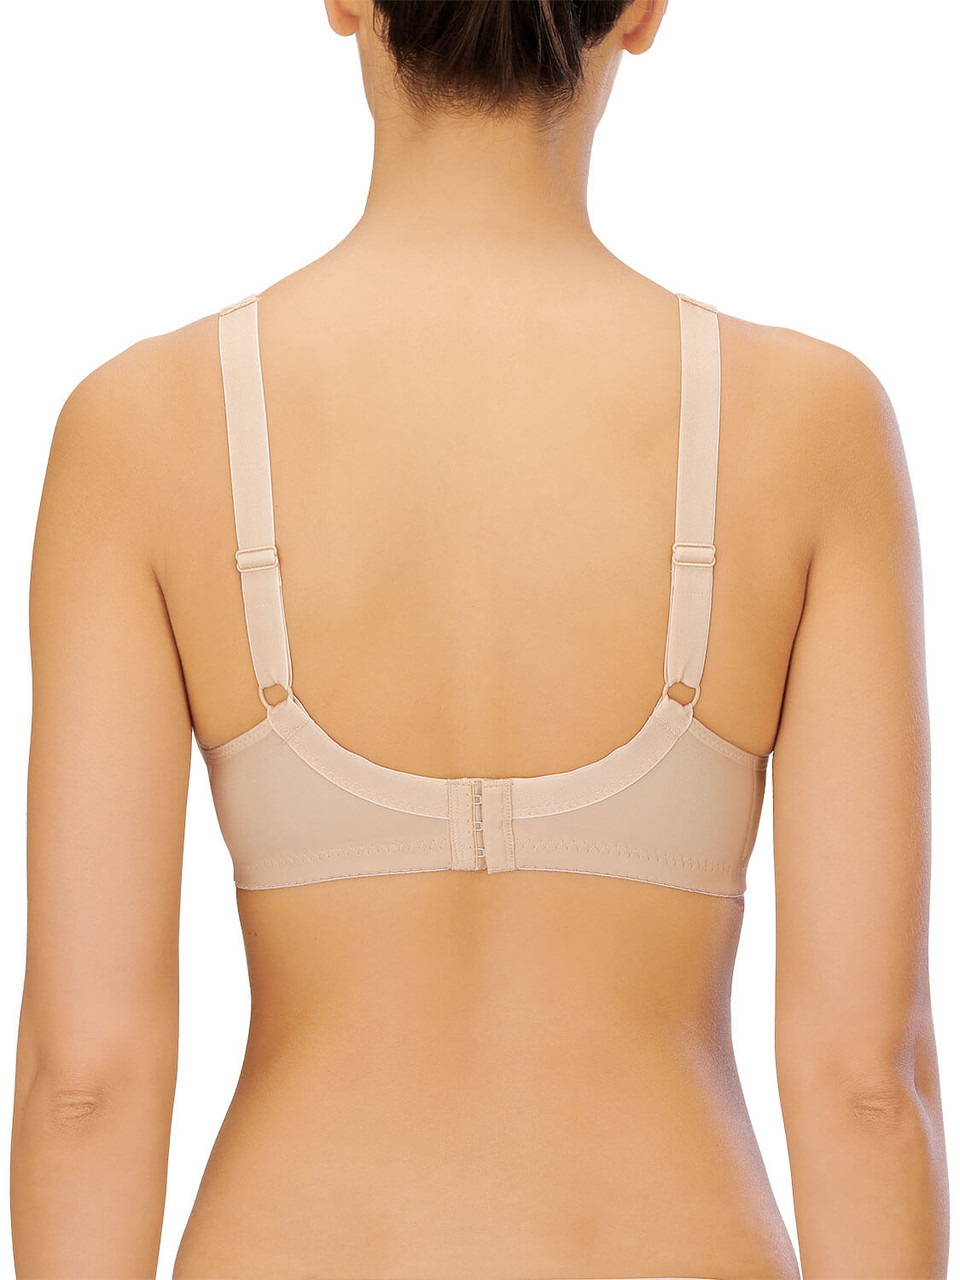 Bras 6cm Thickened Bra For Women Without Wires Adjustable Top Support Lace  Flat Chest A Cup Size Push Up From 11,69 €